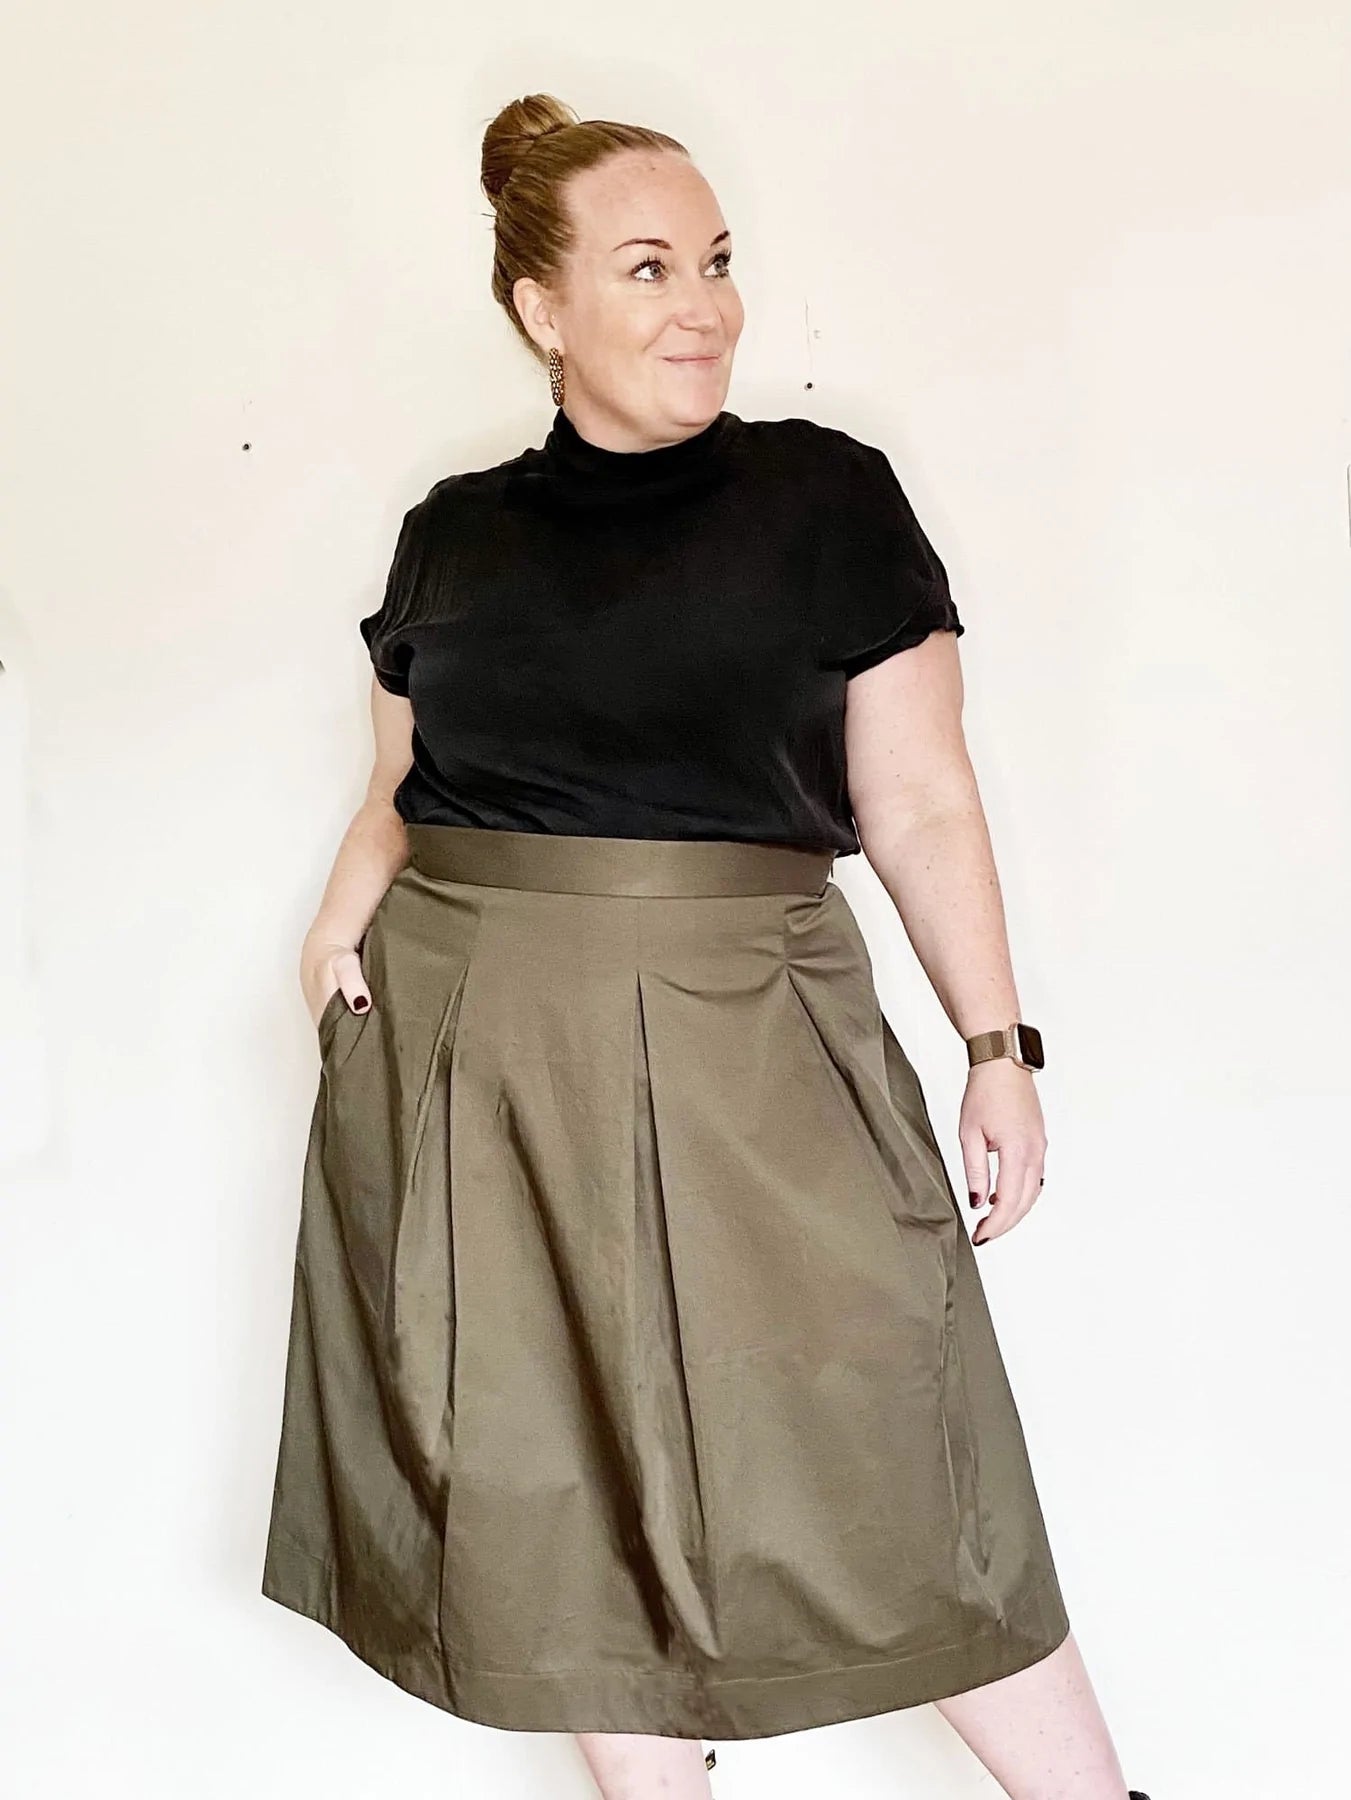 iThinksew - Patterns and More - IvL - Swing Around, Women pleated skirt  sewing pattern, front button skirt, skirt with pockets, high waist long  skirt, midi maxi skirt, knee length flare skirt